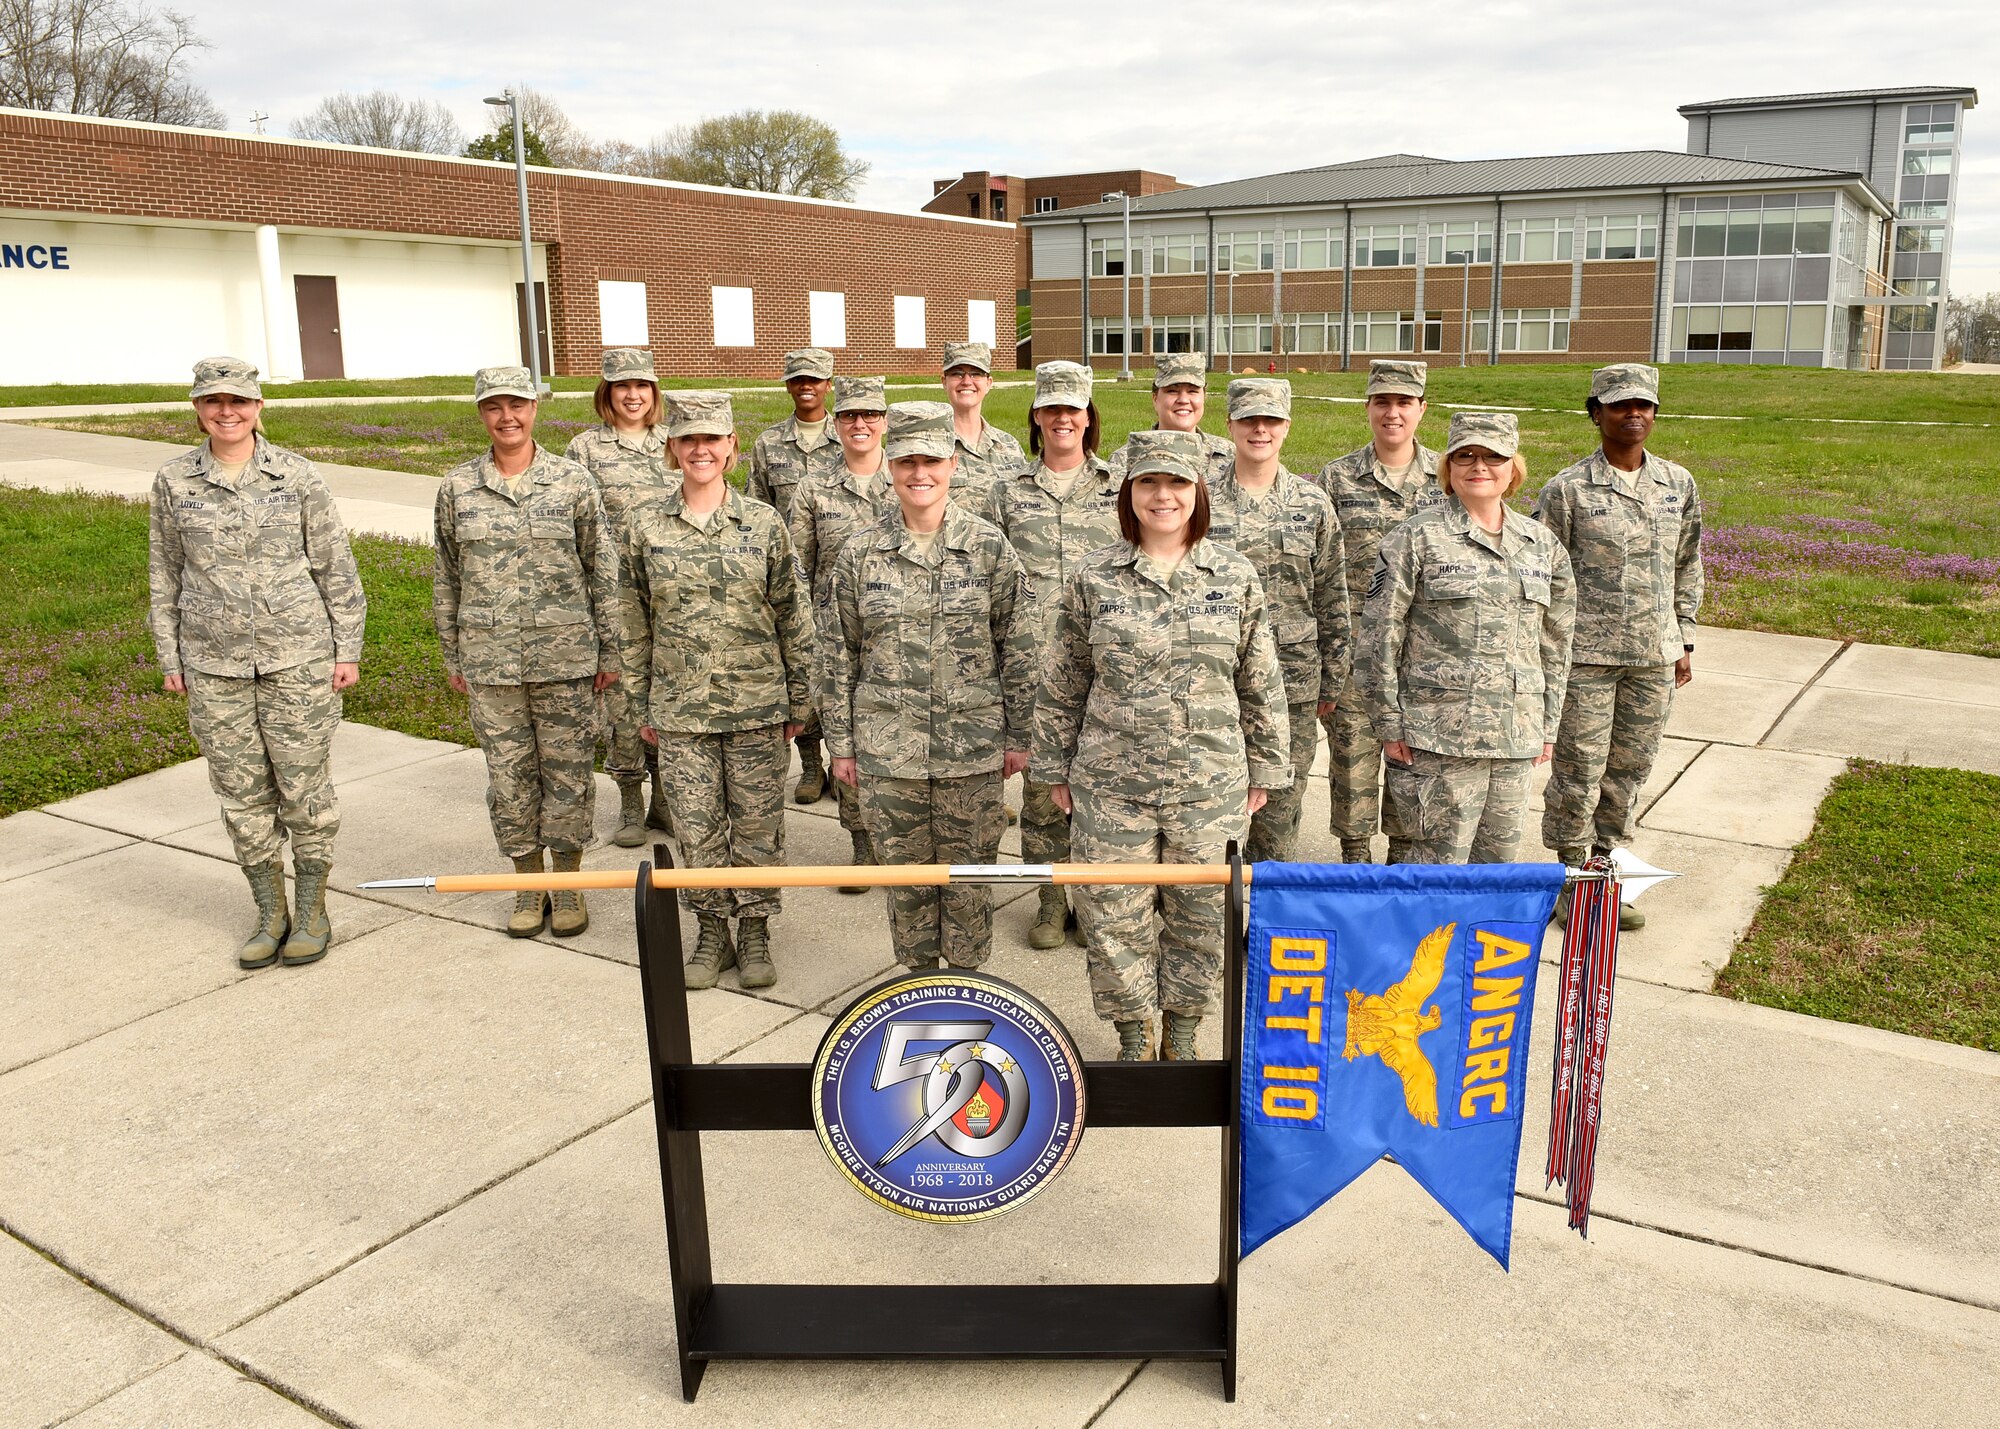 Women assigned to the Air National Guard’s I.G. Brown Training and Education Center take a moment on campus for a photograph